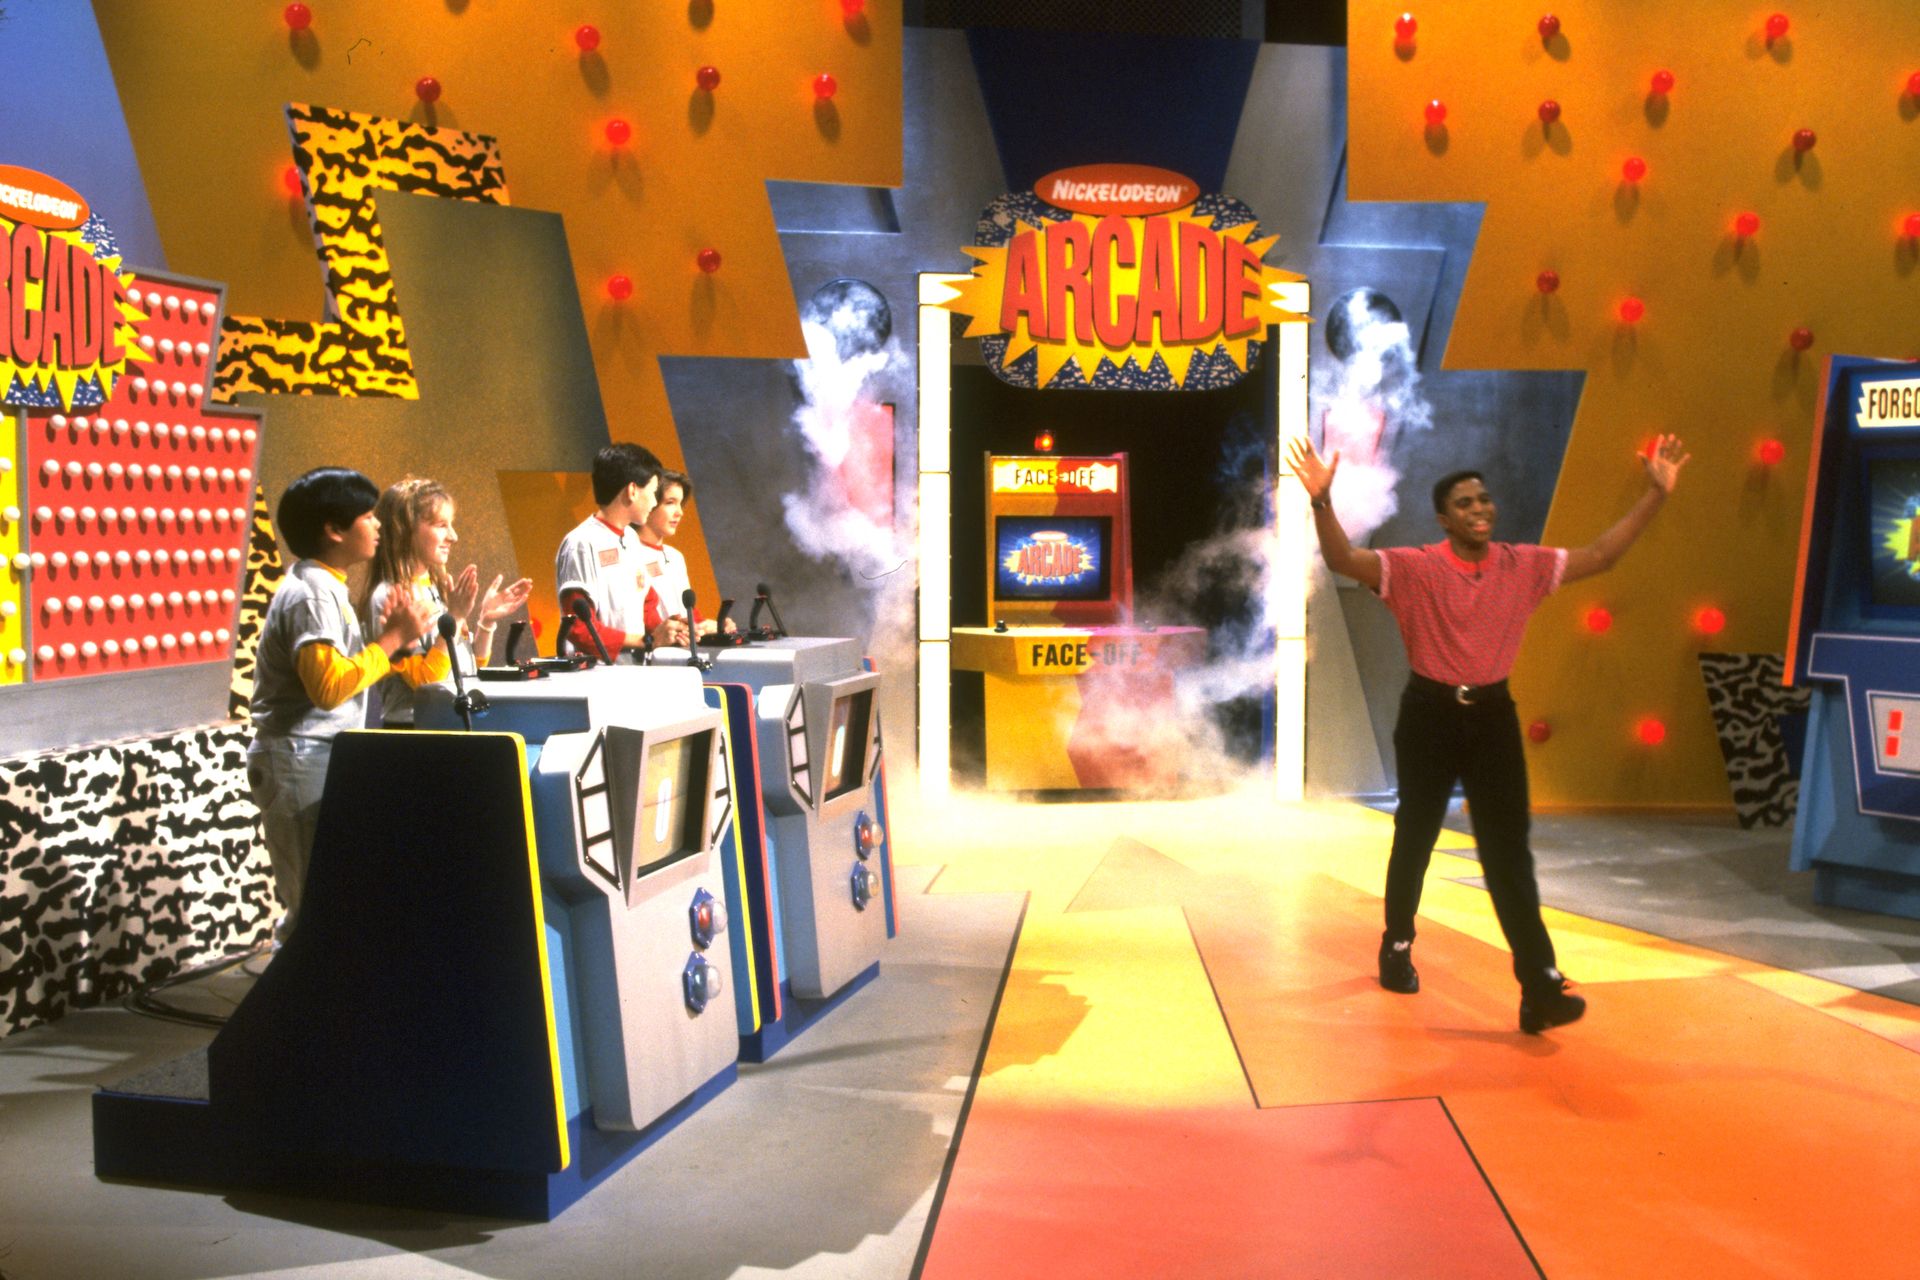 old nickelodeon game shows